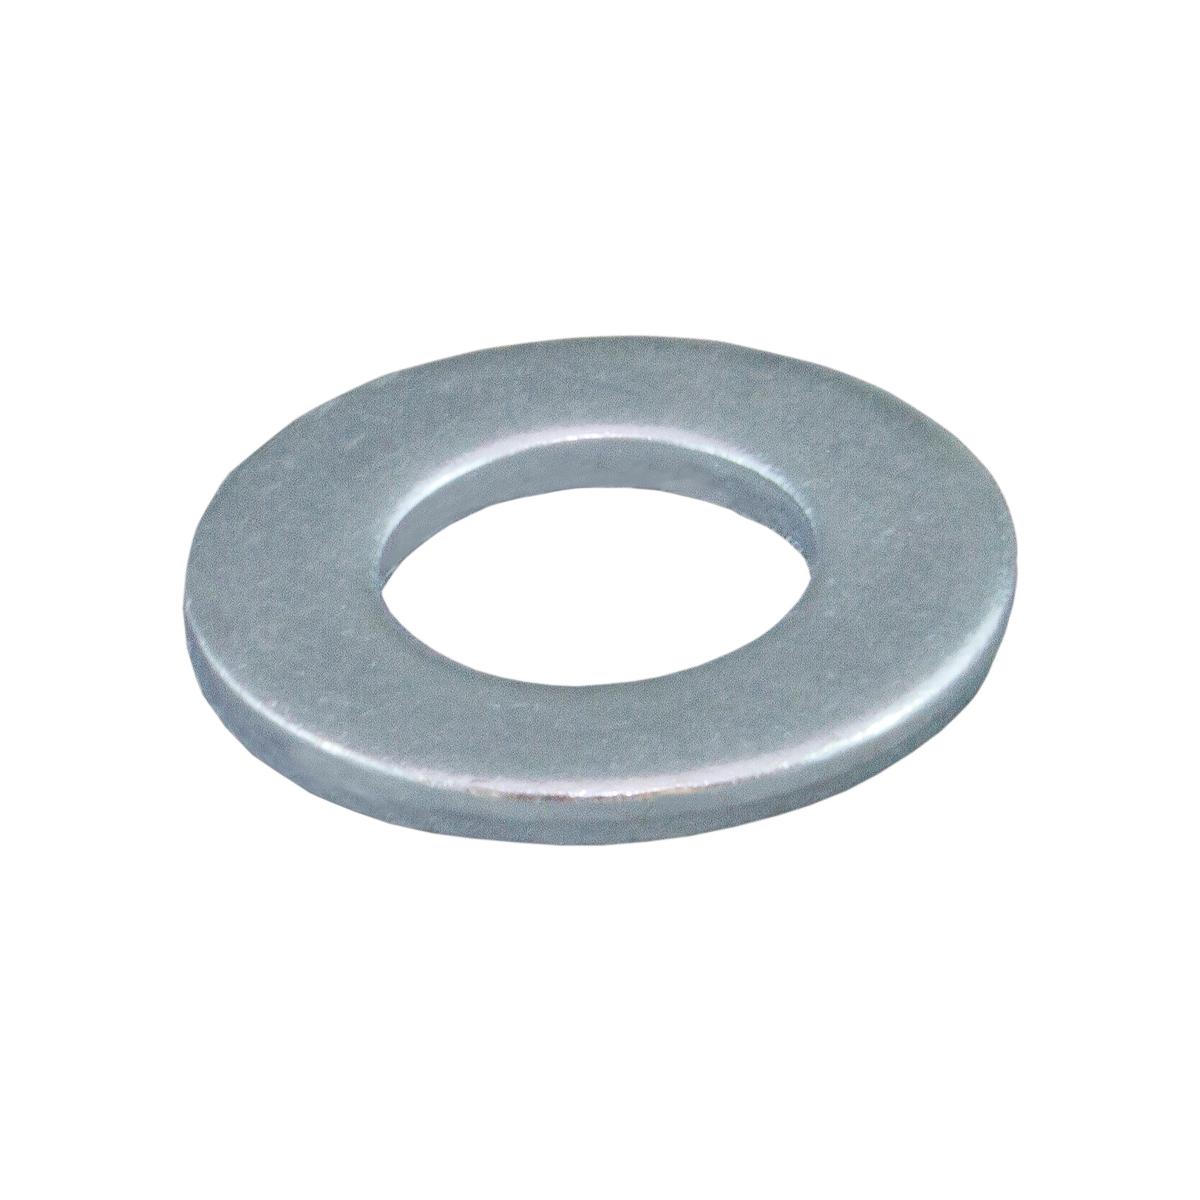 WASHER FLAT 6MM HDG